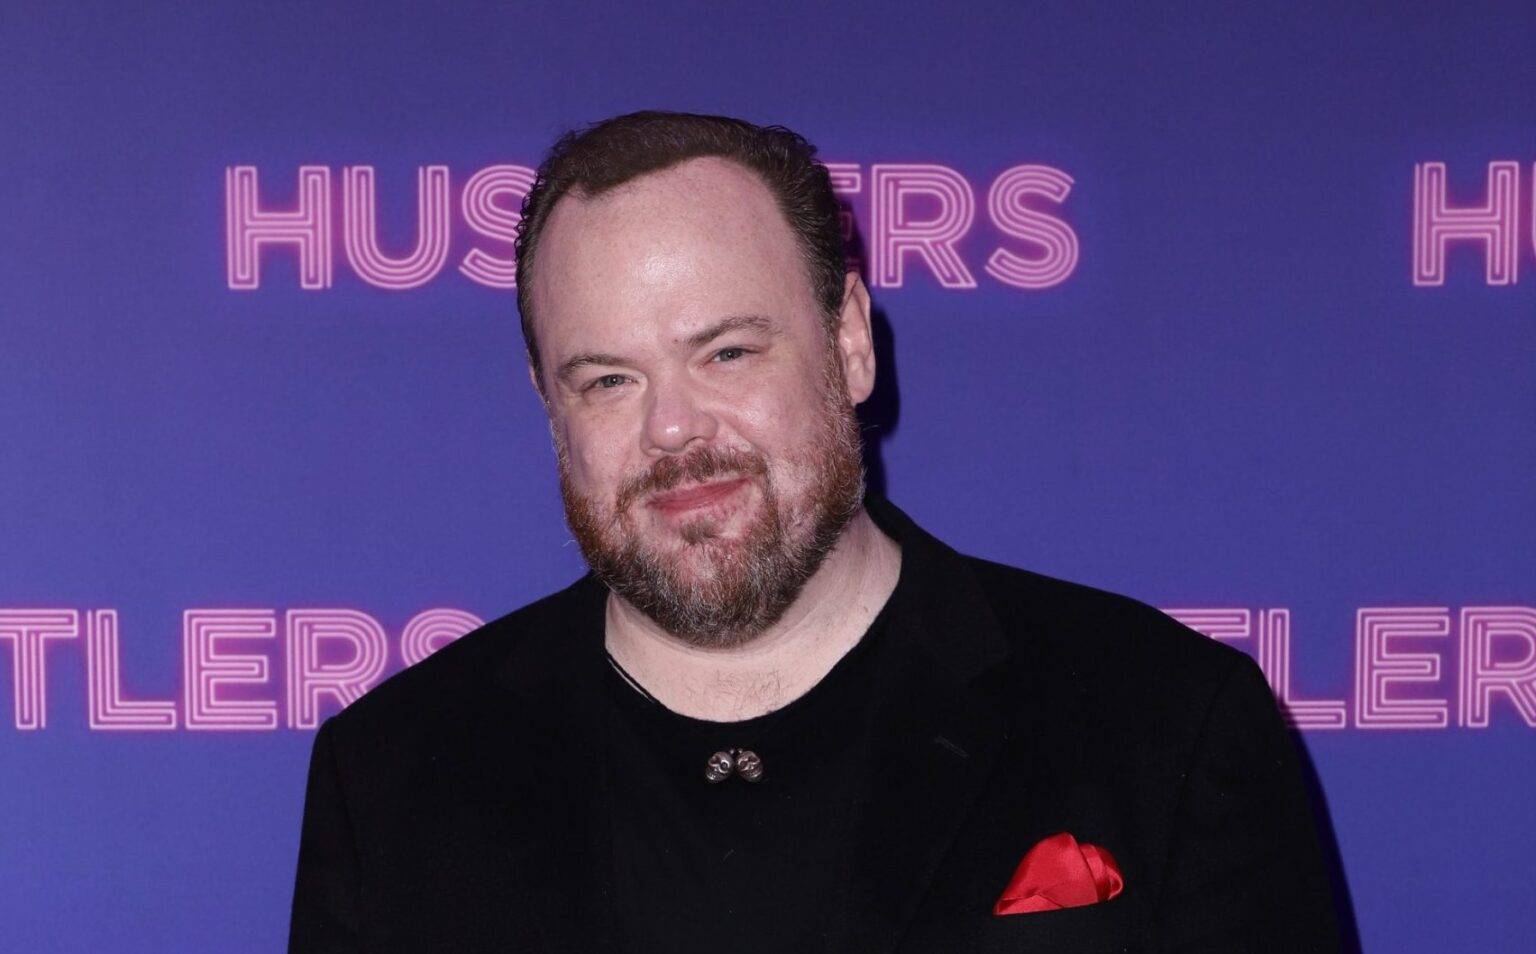 Home Alone actor Devin Ratray ‘hospitalised in critical condition’ as domestic violence trial delayed